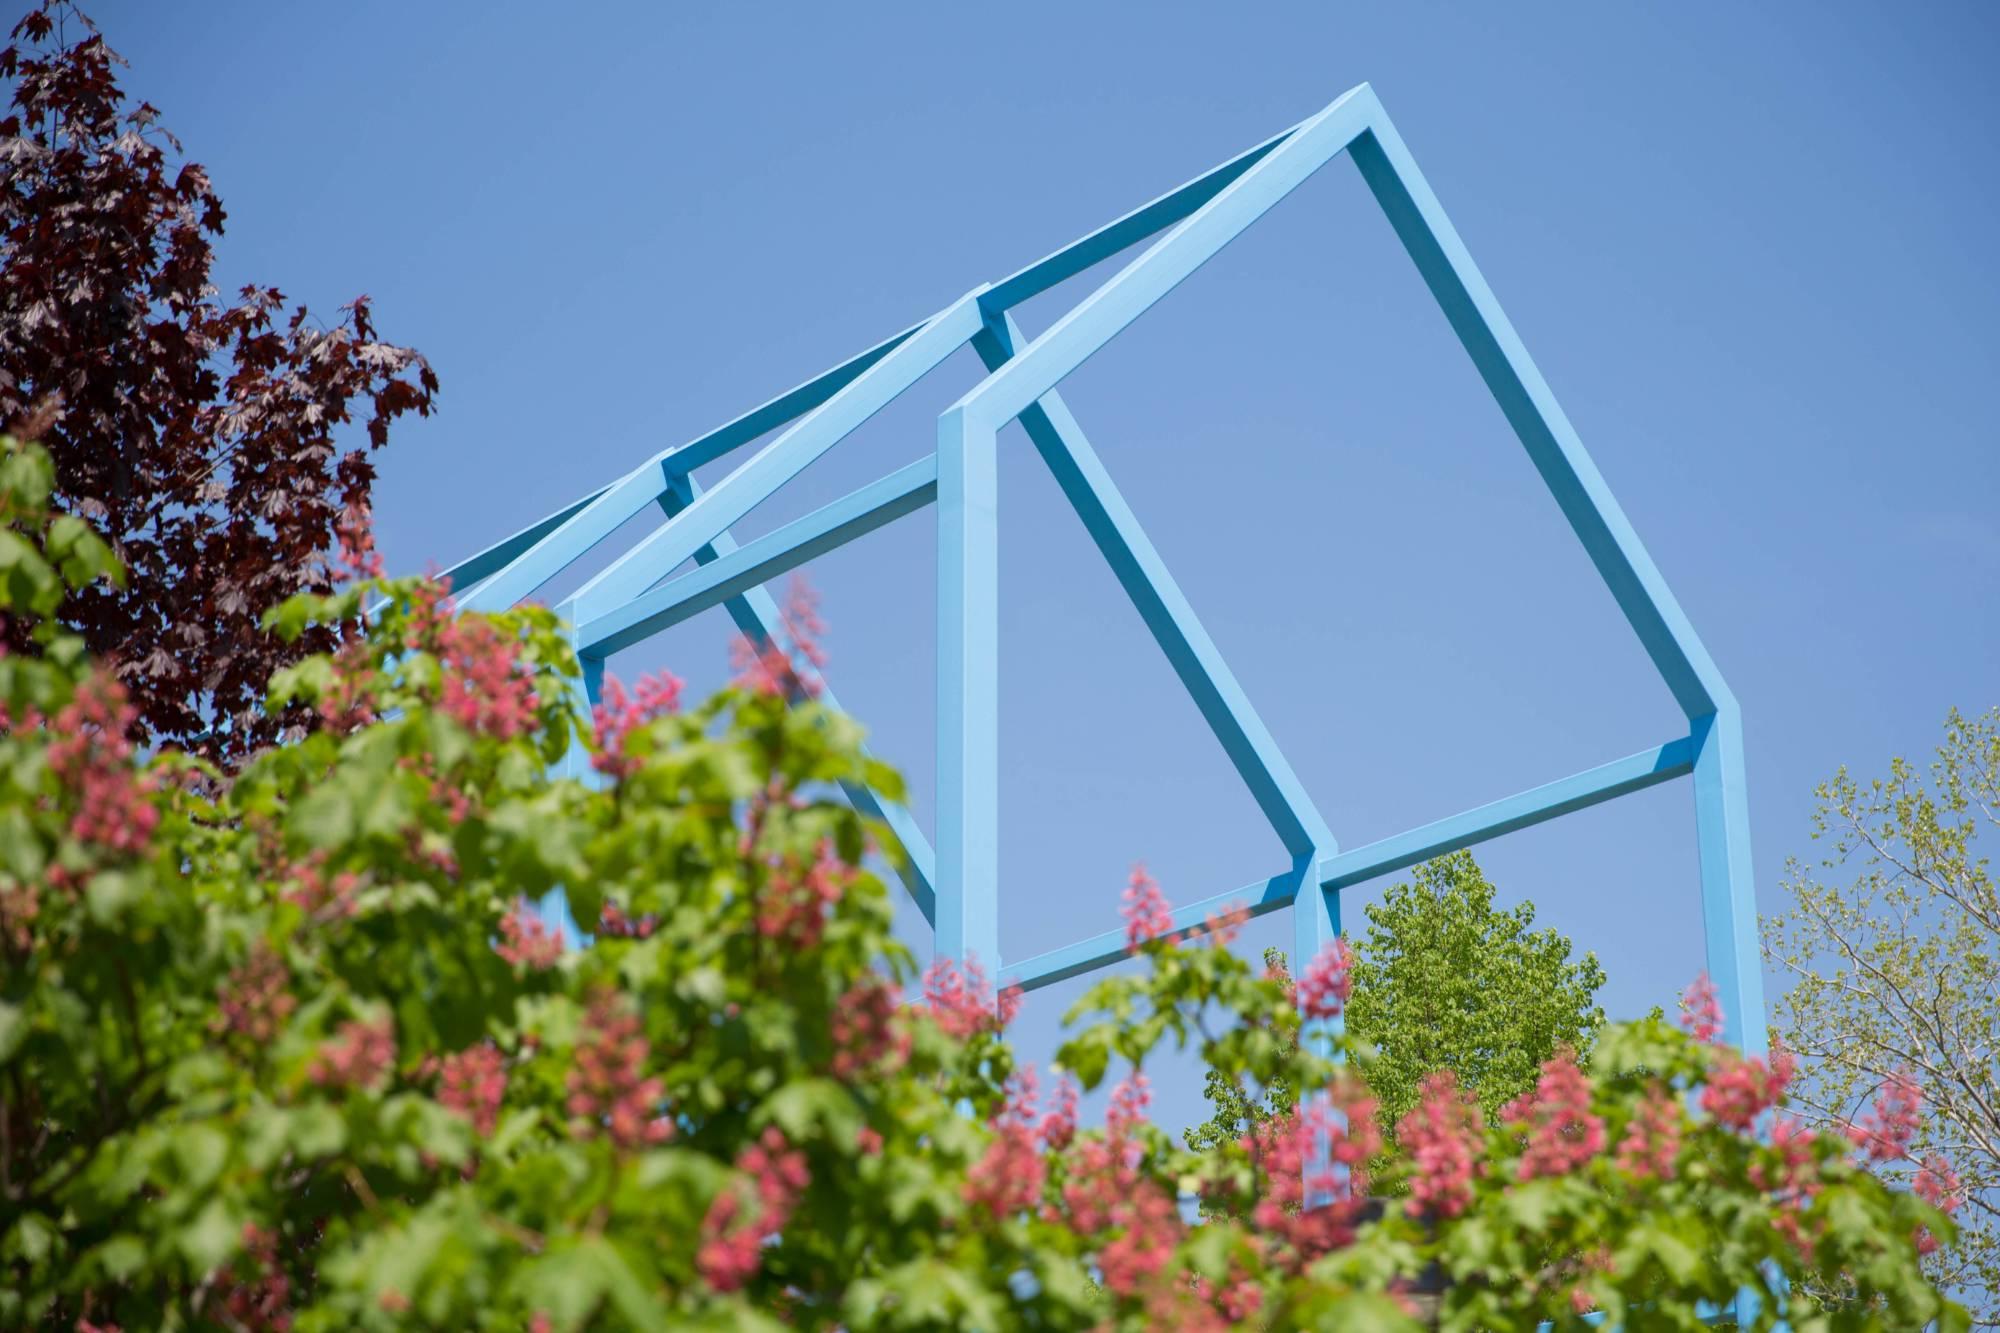 Blue sculpture with greenery in foreground